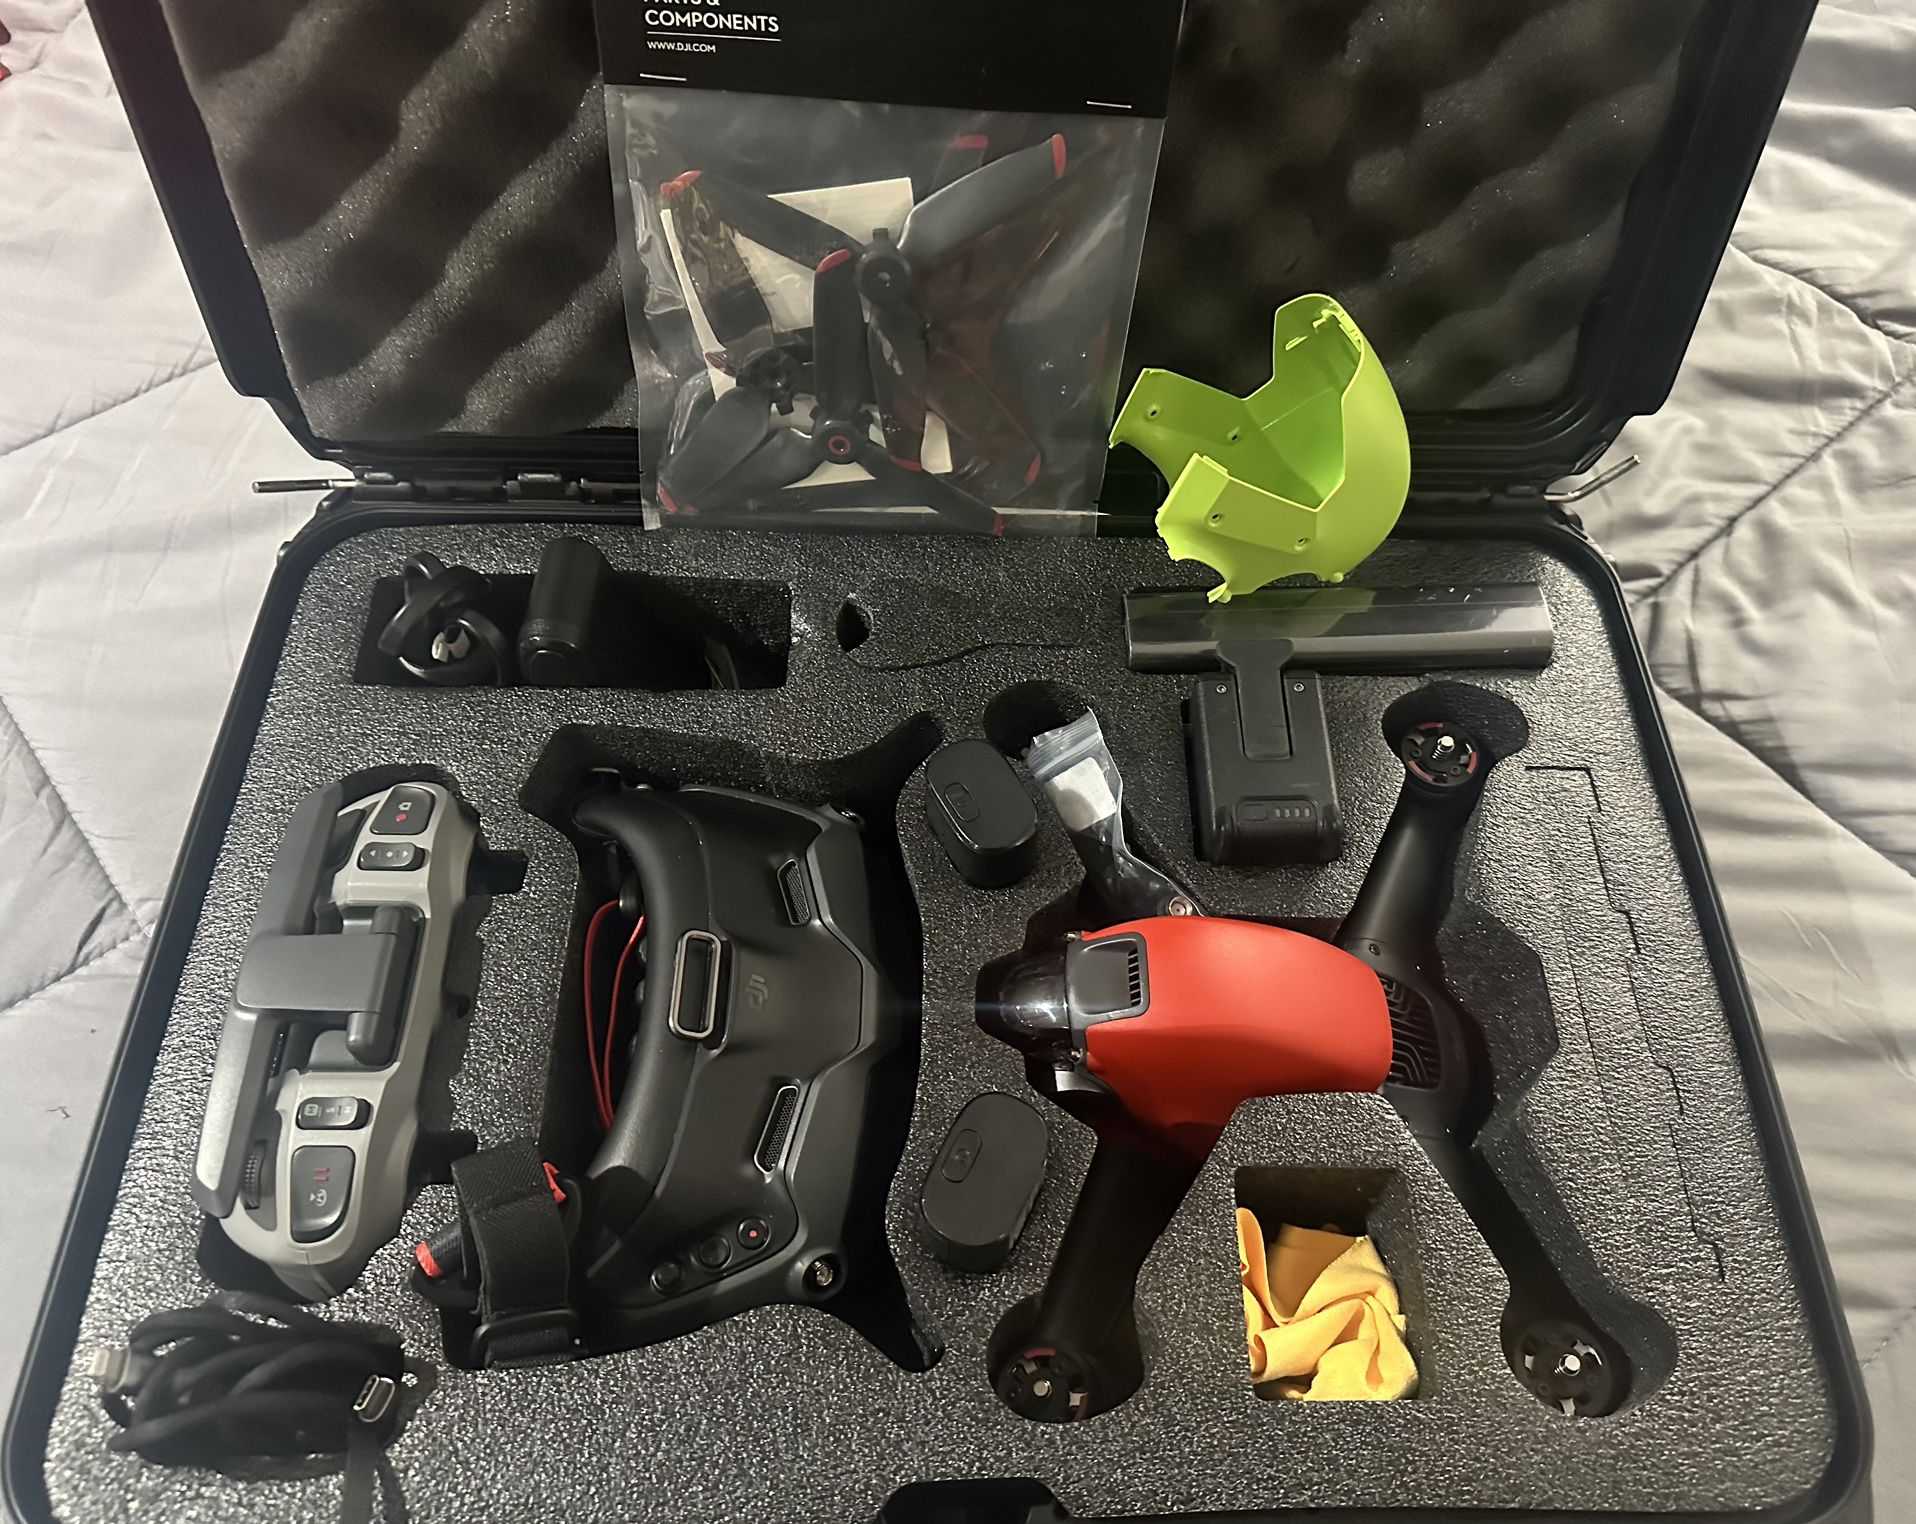 DJI FPV Combo (Goggles V2), First-Person View Drone with 4K Camera, S Flight Mode, Super-Wide 150° F